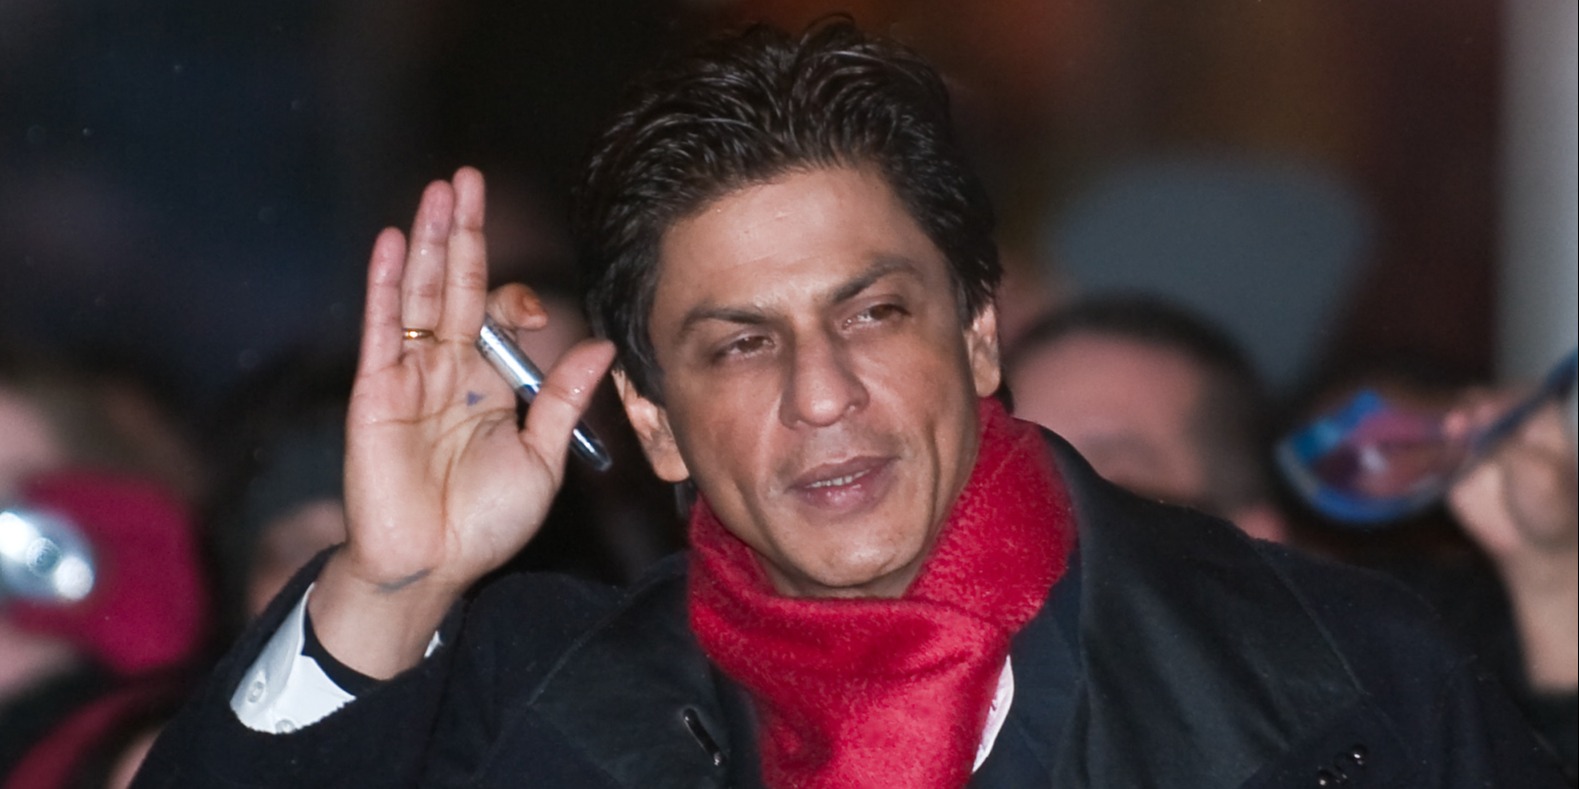 Shah Rukh Khan says he has nothing to do with the release of 8 Naval workers from Qatar